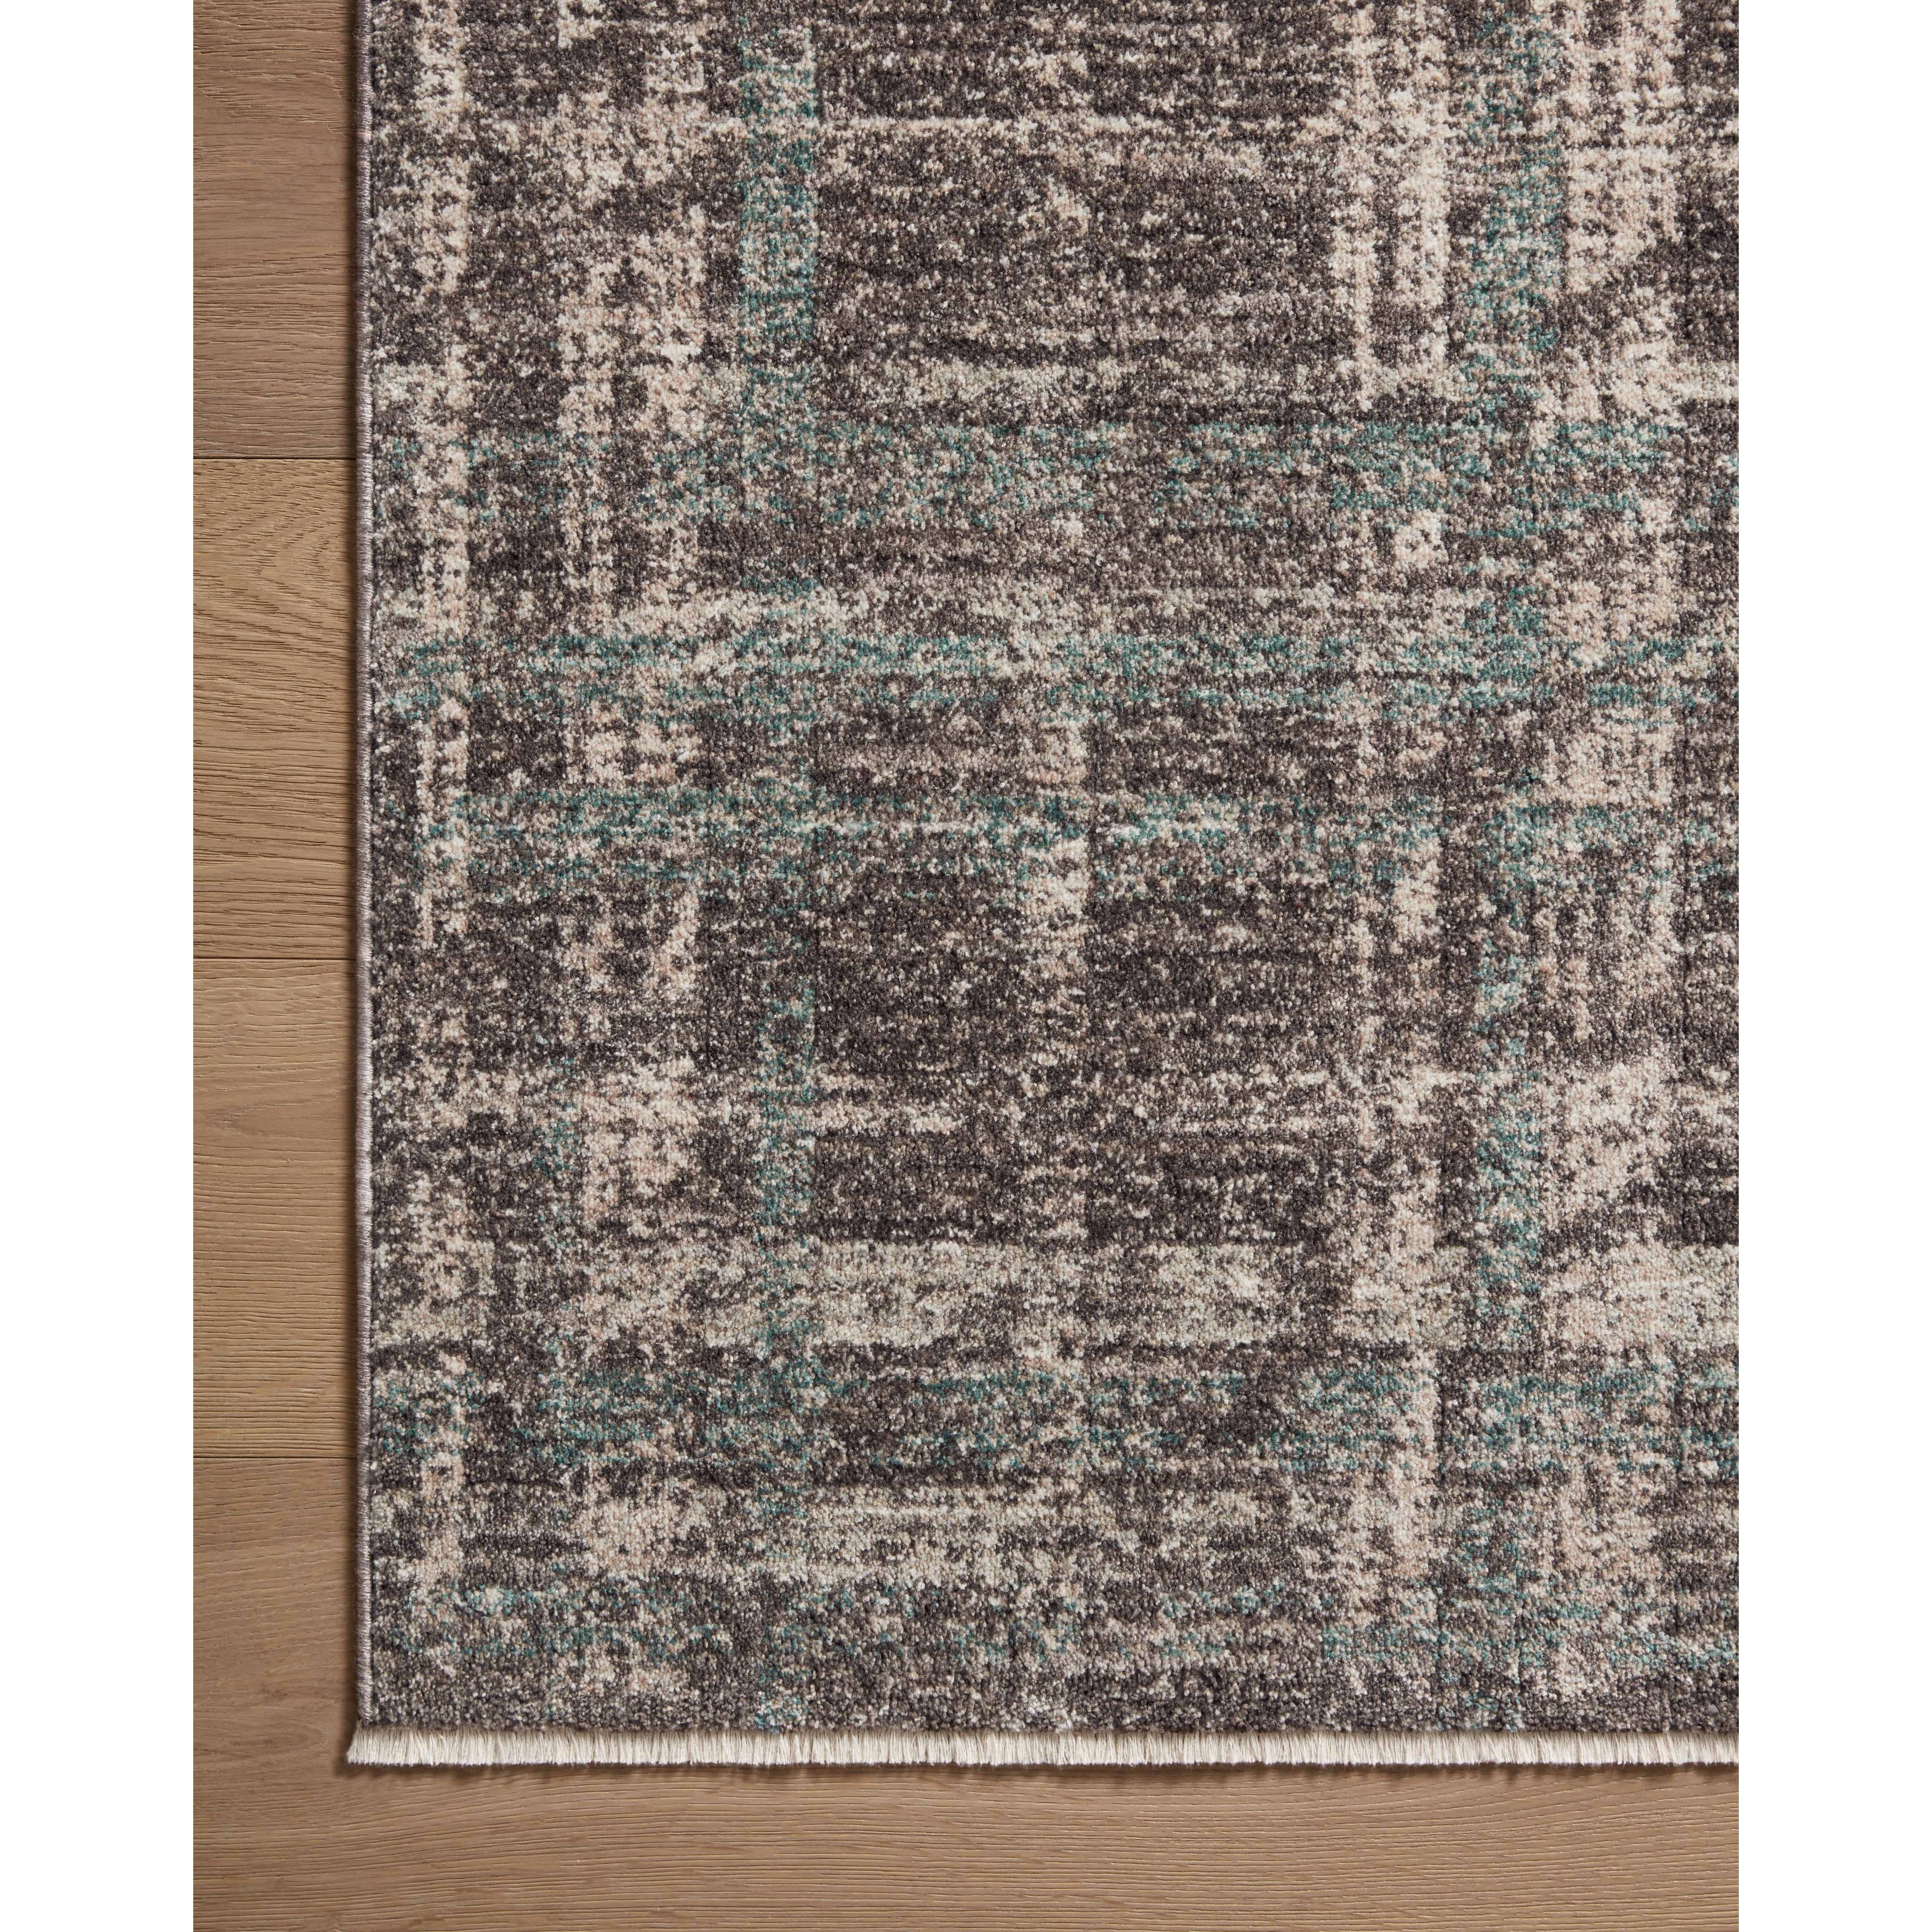 The Ember Collection by Angela Rose x Loloi is a modern flatweave area rug with a timeless plaid pattern that adds depth and coziness to any living room, bedroom, dining room, or hallway. Ember is power-loomed of 100% space-dyed polyester, a durable construction that creates a nuanced depth of color, available in a range of neutral palettes. Amethyst Home provides interior design, new home construction design consulting, vintage area rugs, and lighting in the San Diego metro area.